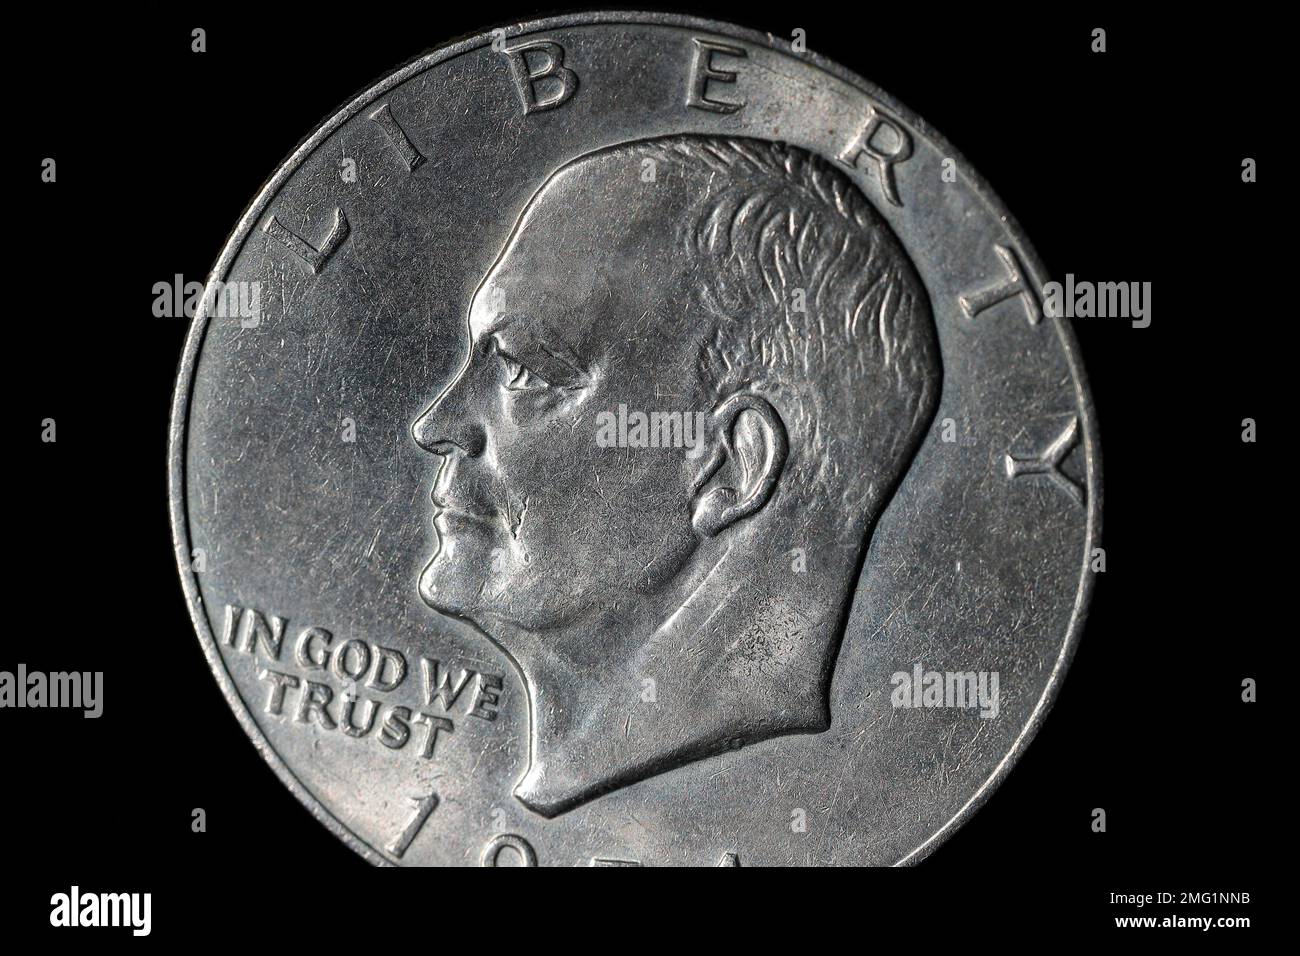 Obverse of a U.S $1 dollar coin issued in 1974.It features President Eisenhower with the word 'Liberty' and the phrase 'In God We Trust' Stock Photo